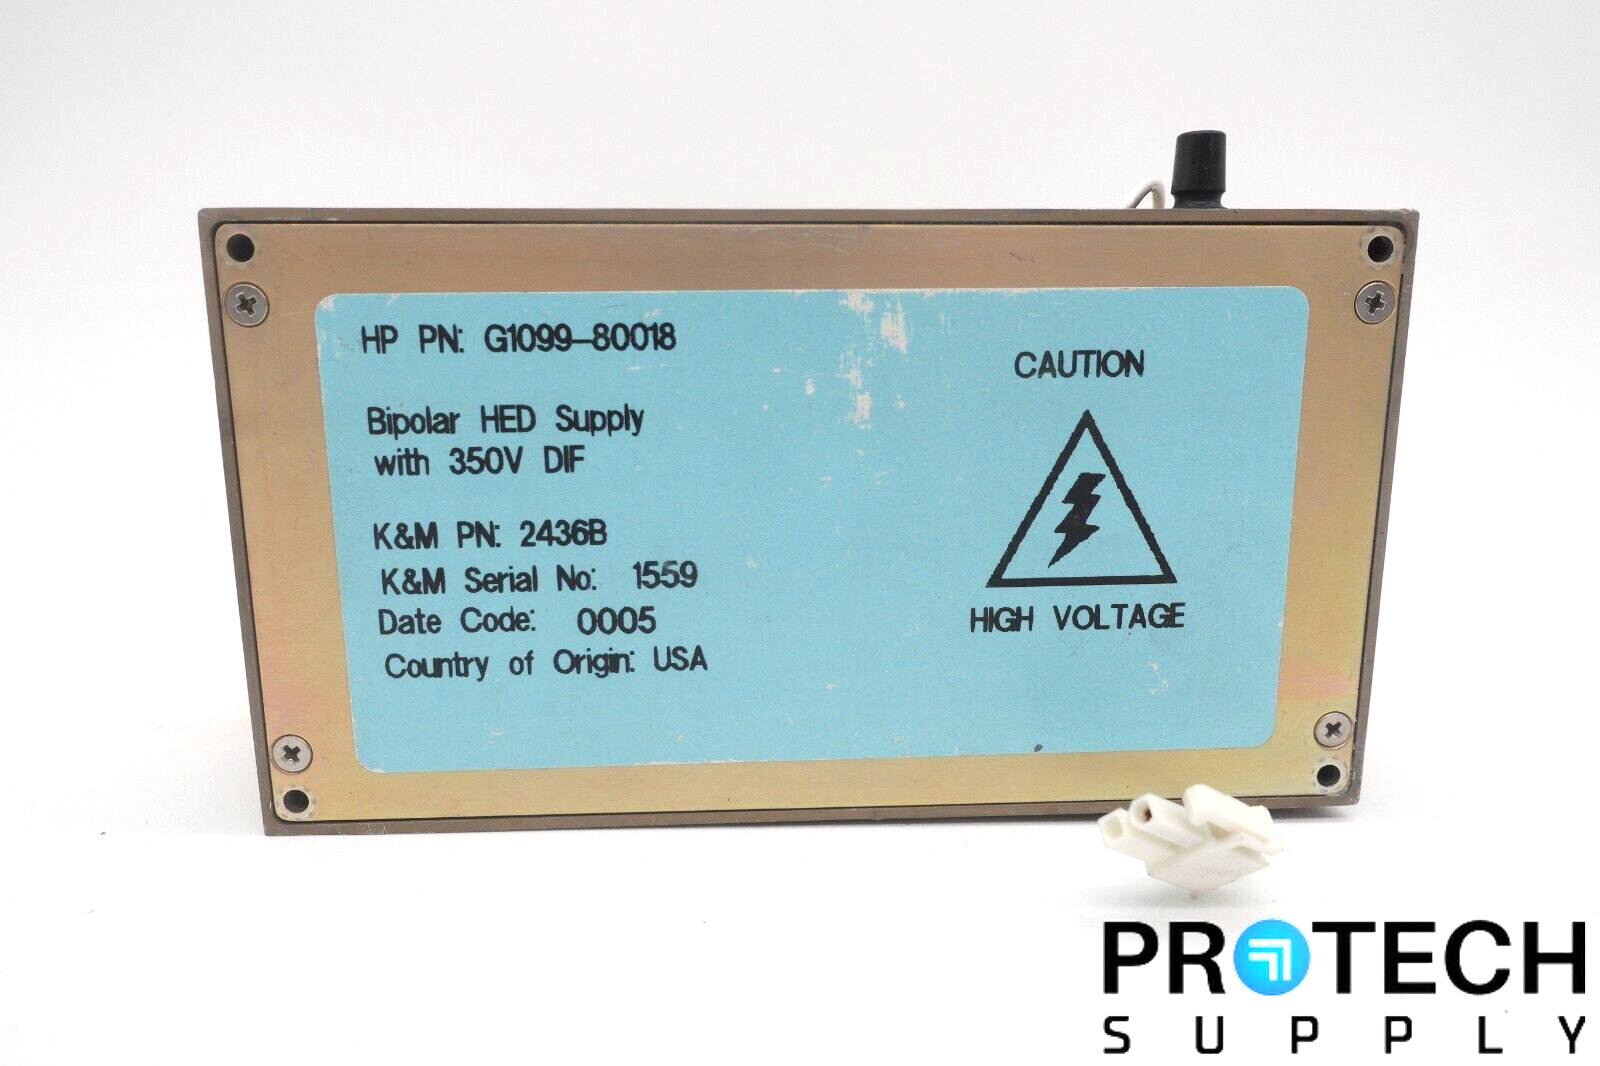 HP / Agilent G1099-80018 BI-POLAR HED Supply with 350V DIF with WARRANTY